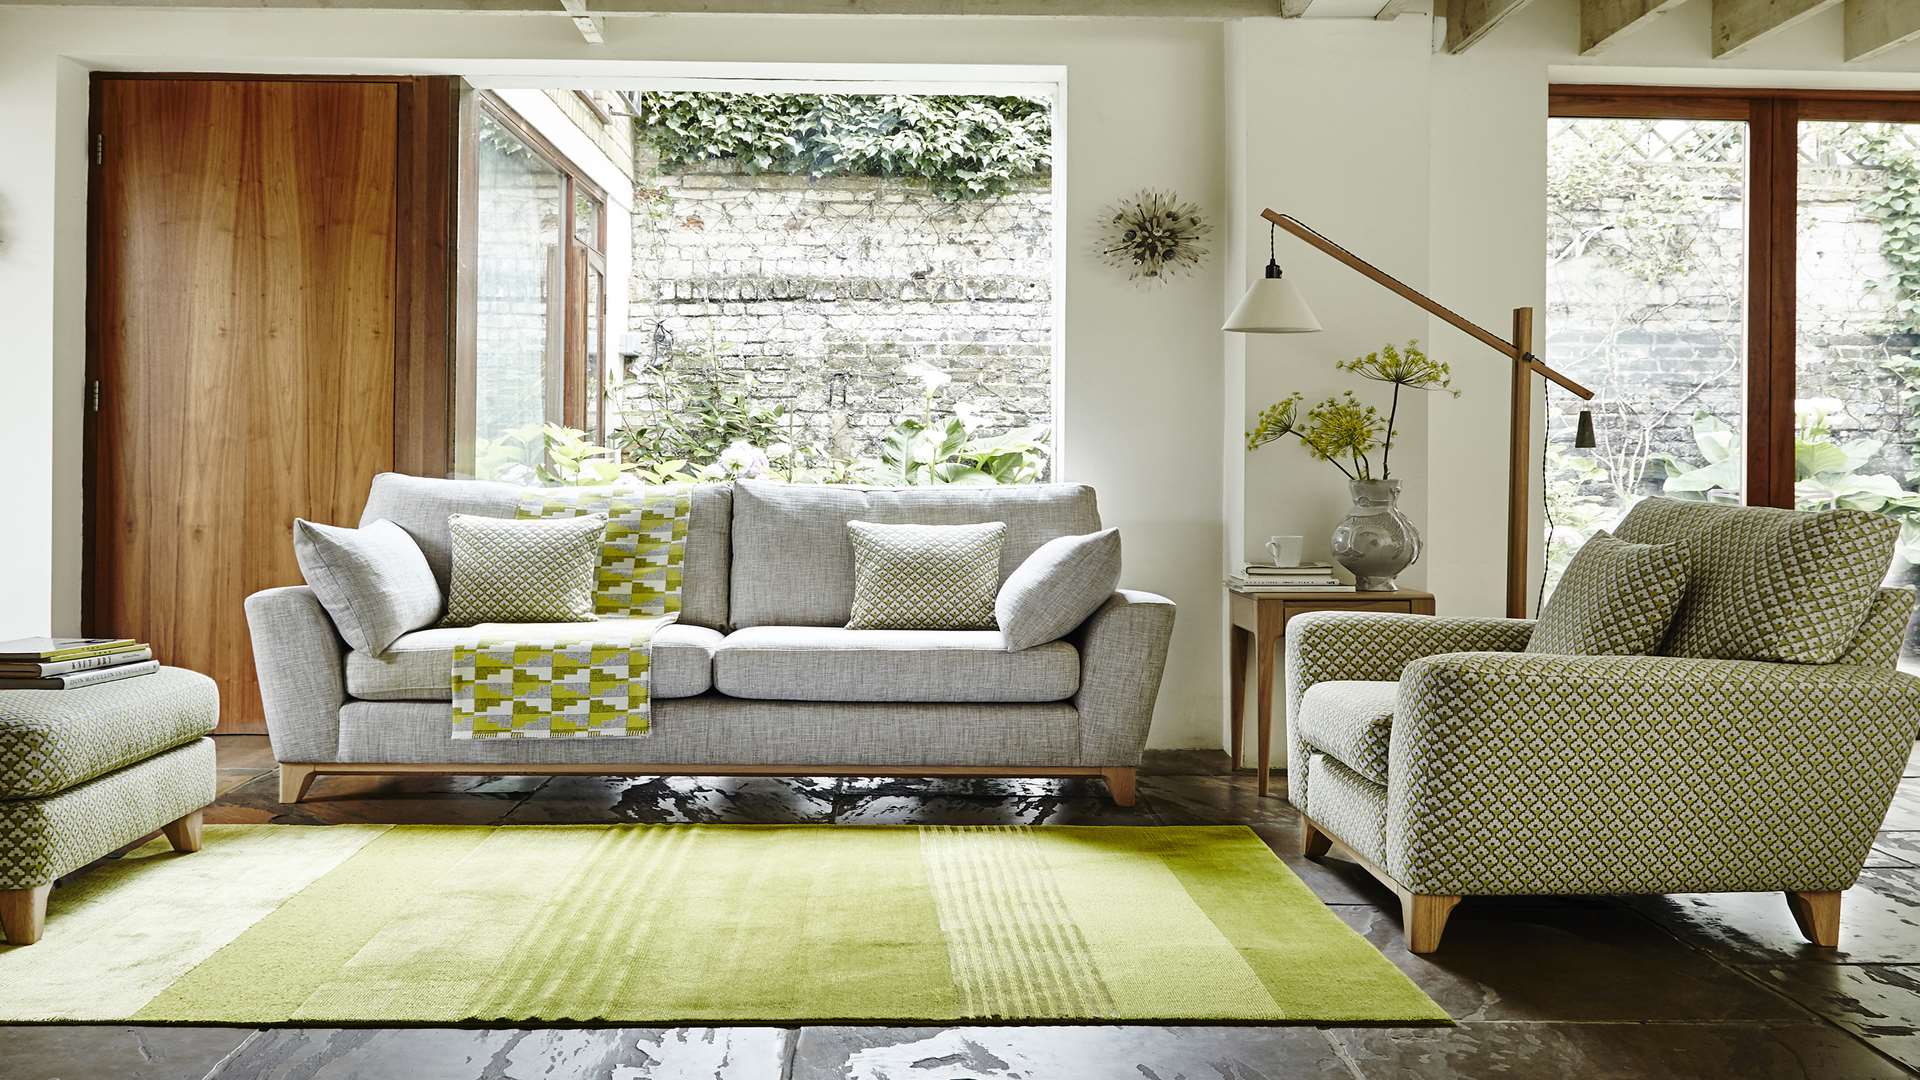 Novara Sofa & Romana Collection: Deposit £974 Just £80 per month x 35 months. Large sofa + Armchair + Stool + Lamp Table. All completely interest free